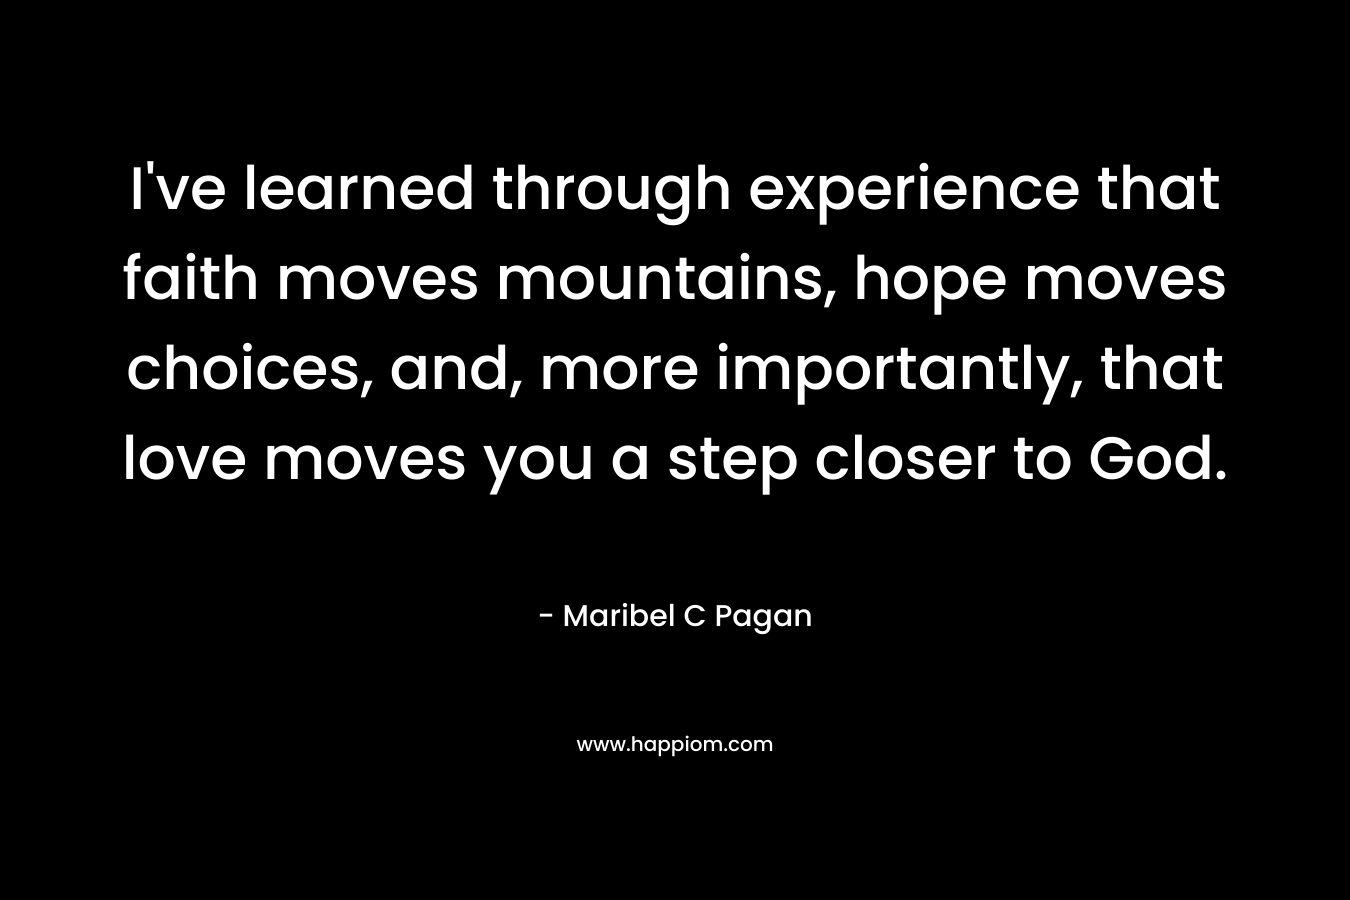 I've learned through experience that faith moves mountains, hope moves choices, and, more importantly, that love moves you a step closer to God.